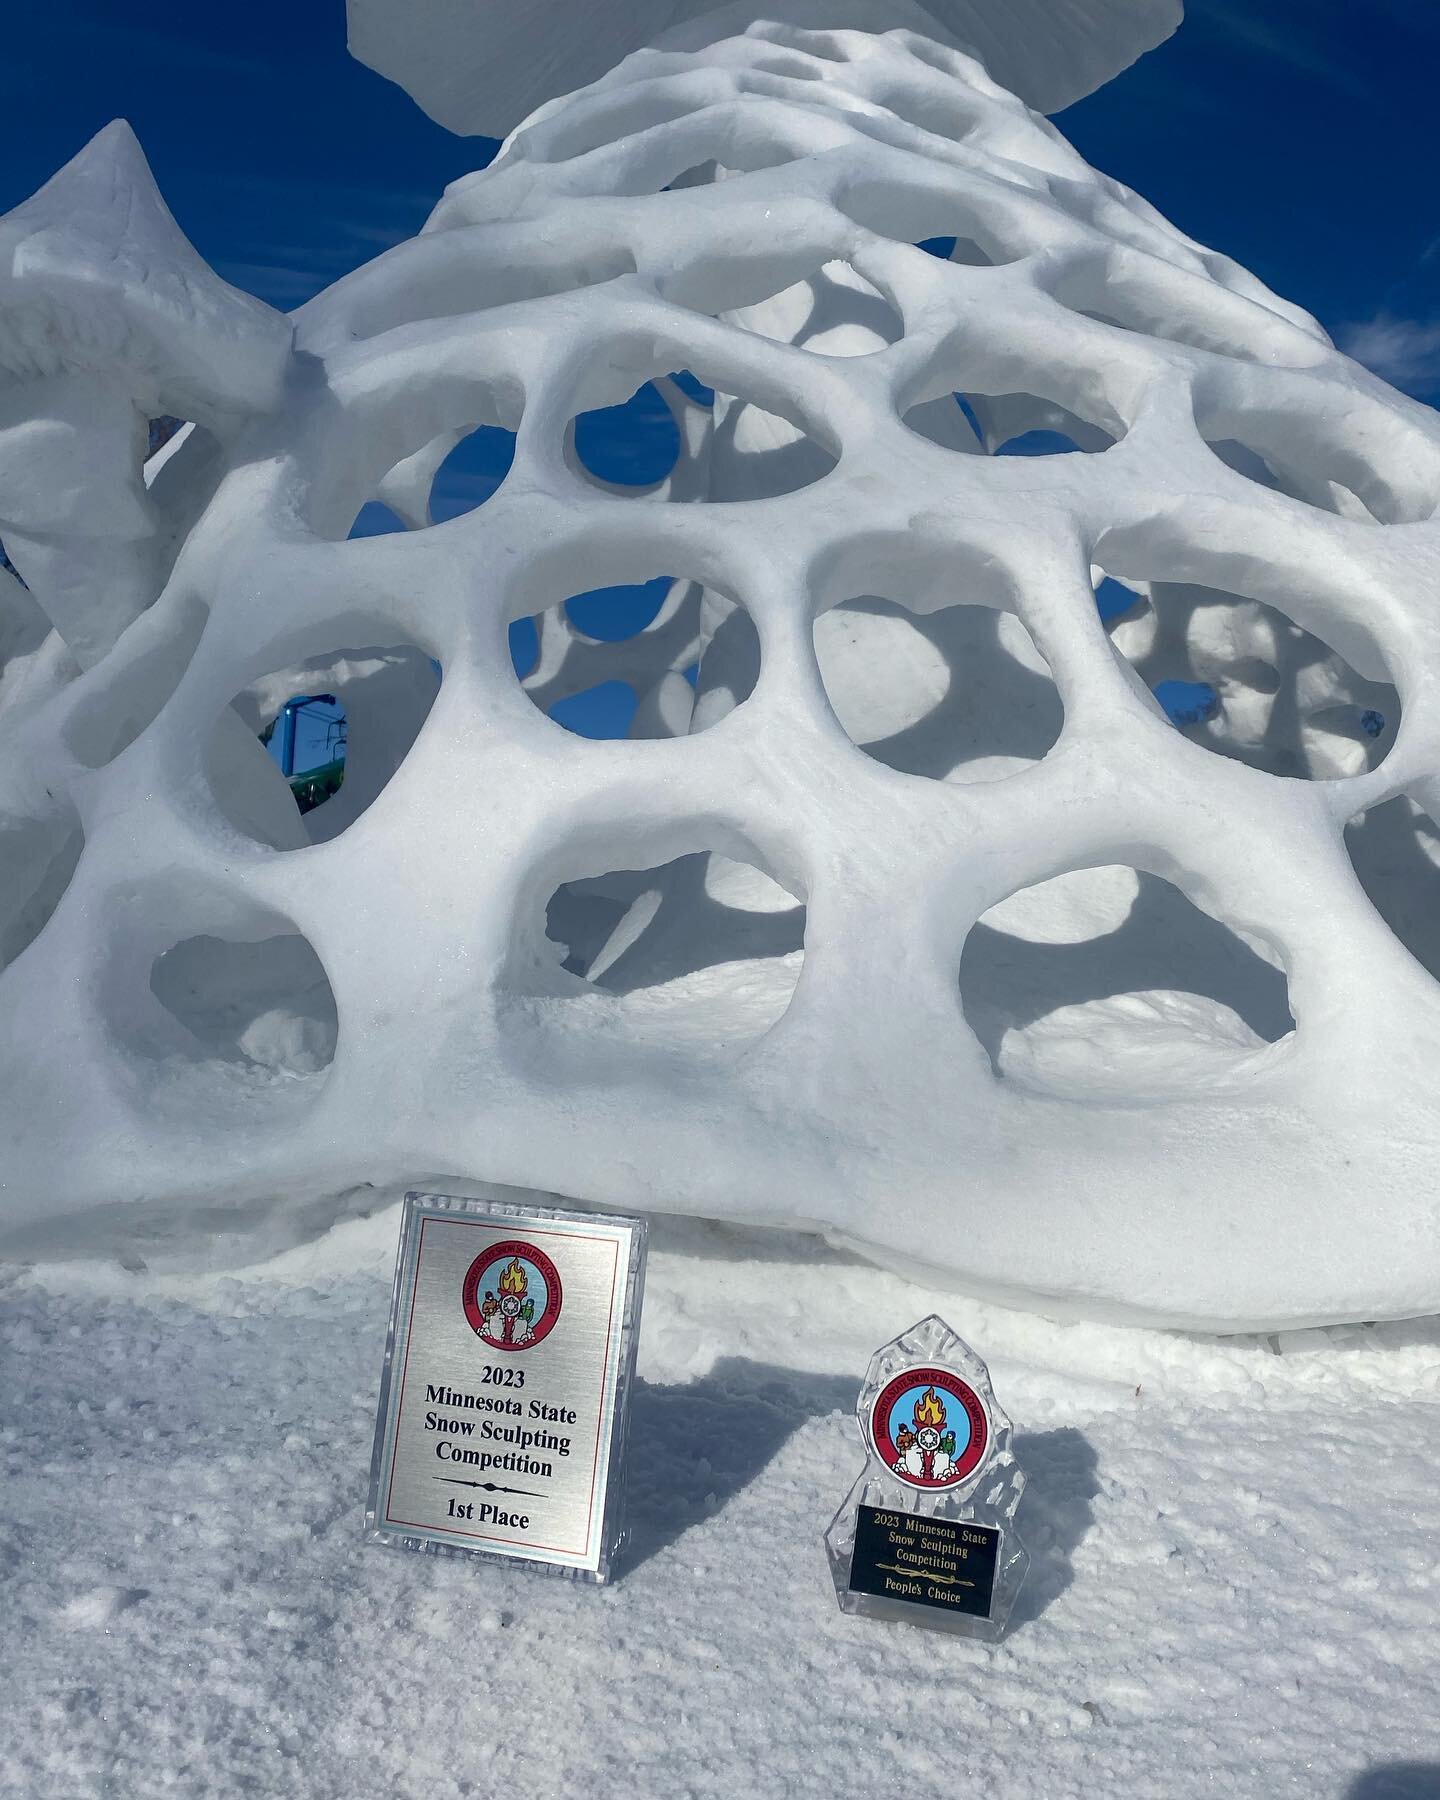 Woop! First Place and People&rsquo;s Choice!!

#houseofthune #minnesota #sculpture #snowsculpture #veilmushroom #firstplace #mushrooms #ecology #fungi #fungus